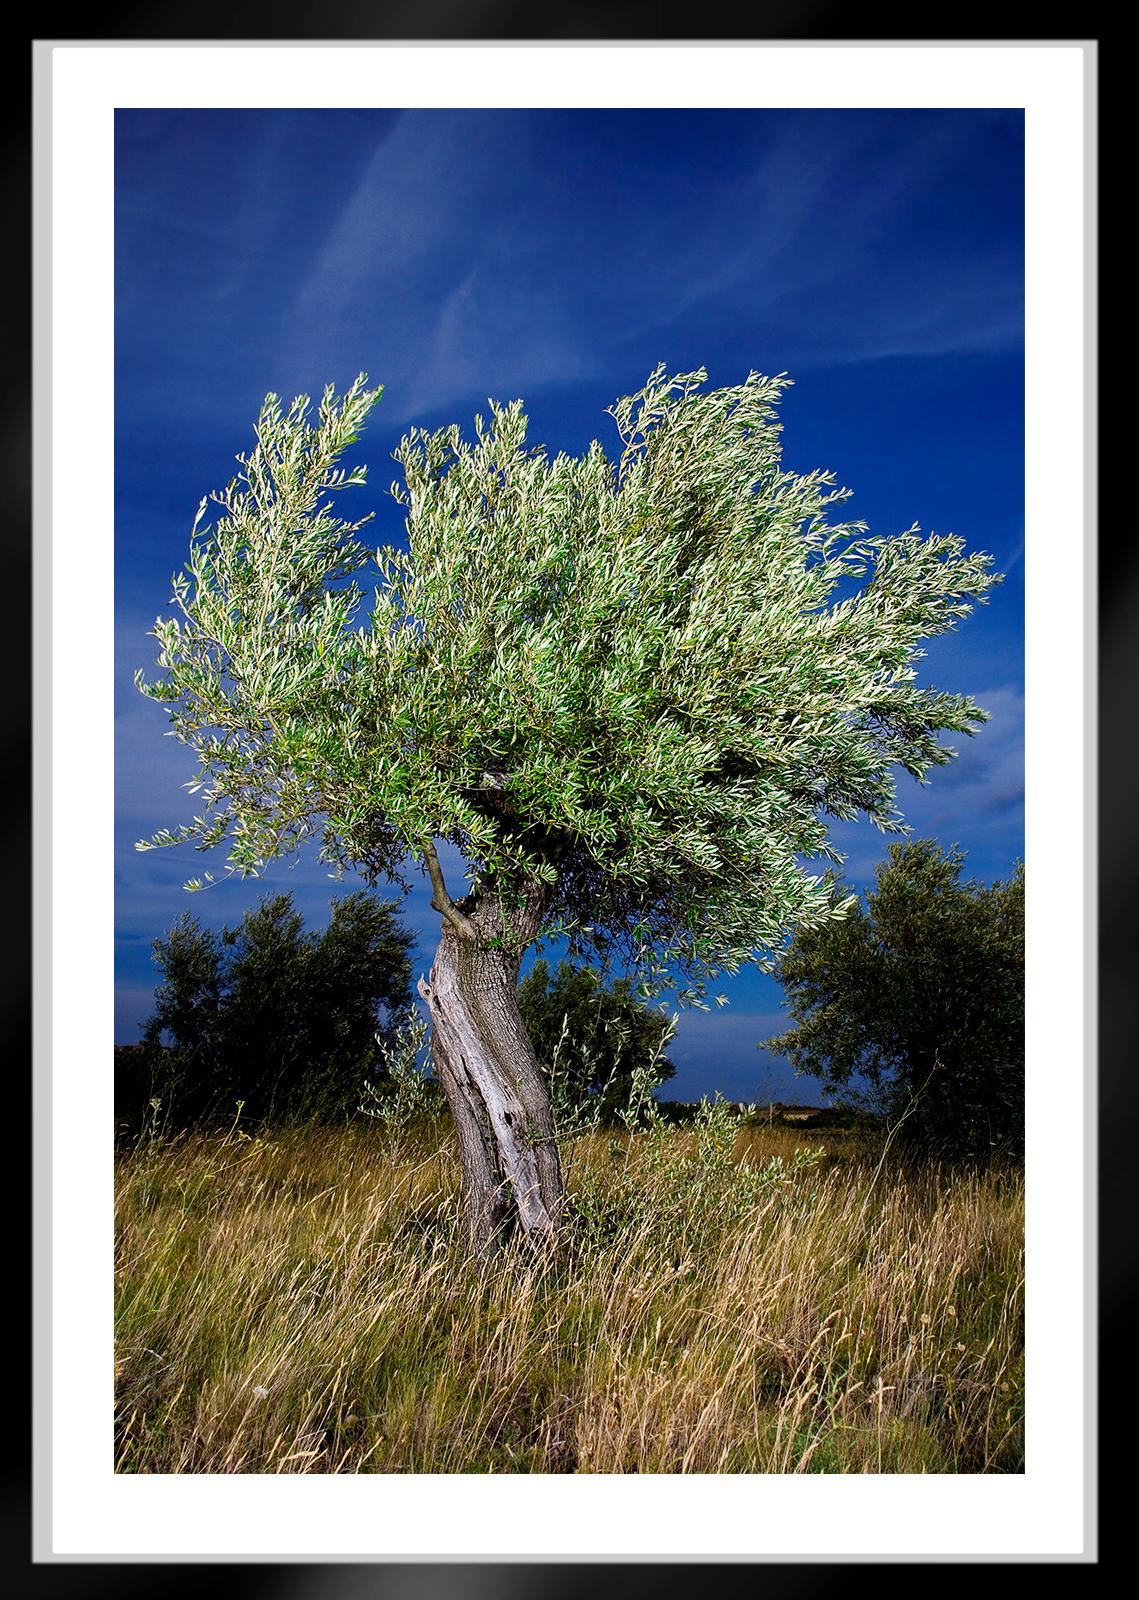 Olivier-Signed limited edition still life print, Nature, Landscape, Green tree - Photograph by Ian Sanderson